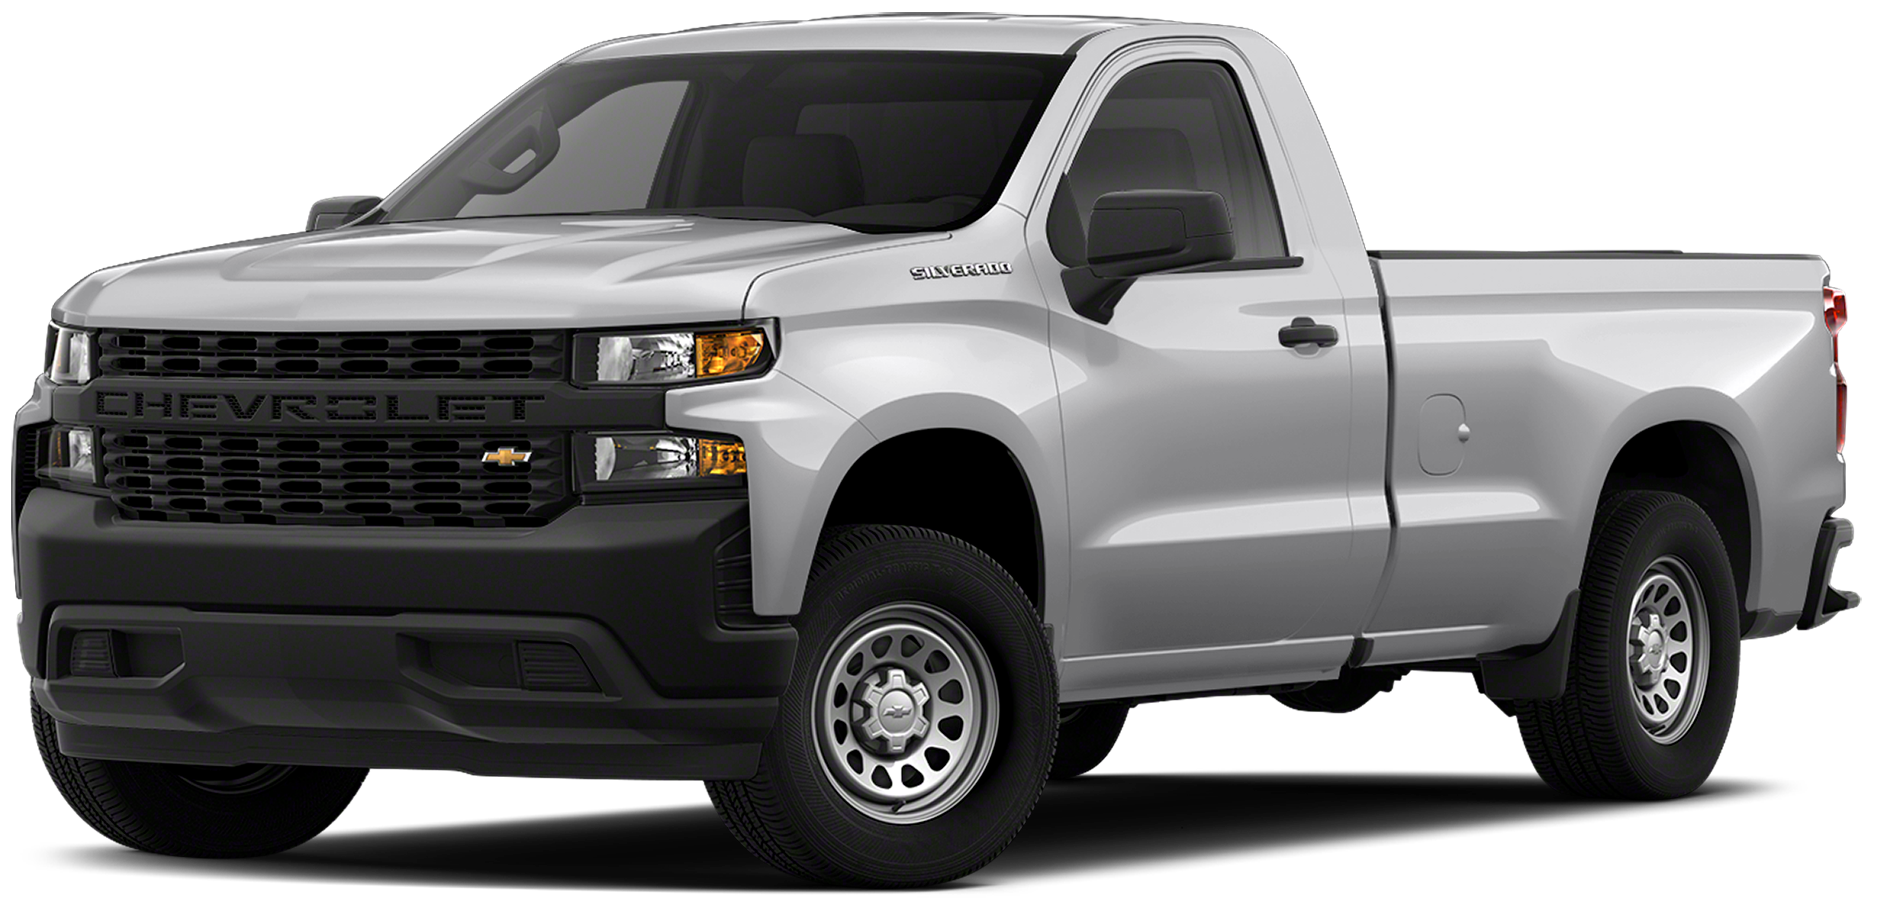 2019 Chevrolet Silverado 1500 Incentives, Specials & Offers in Orchard ...